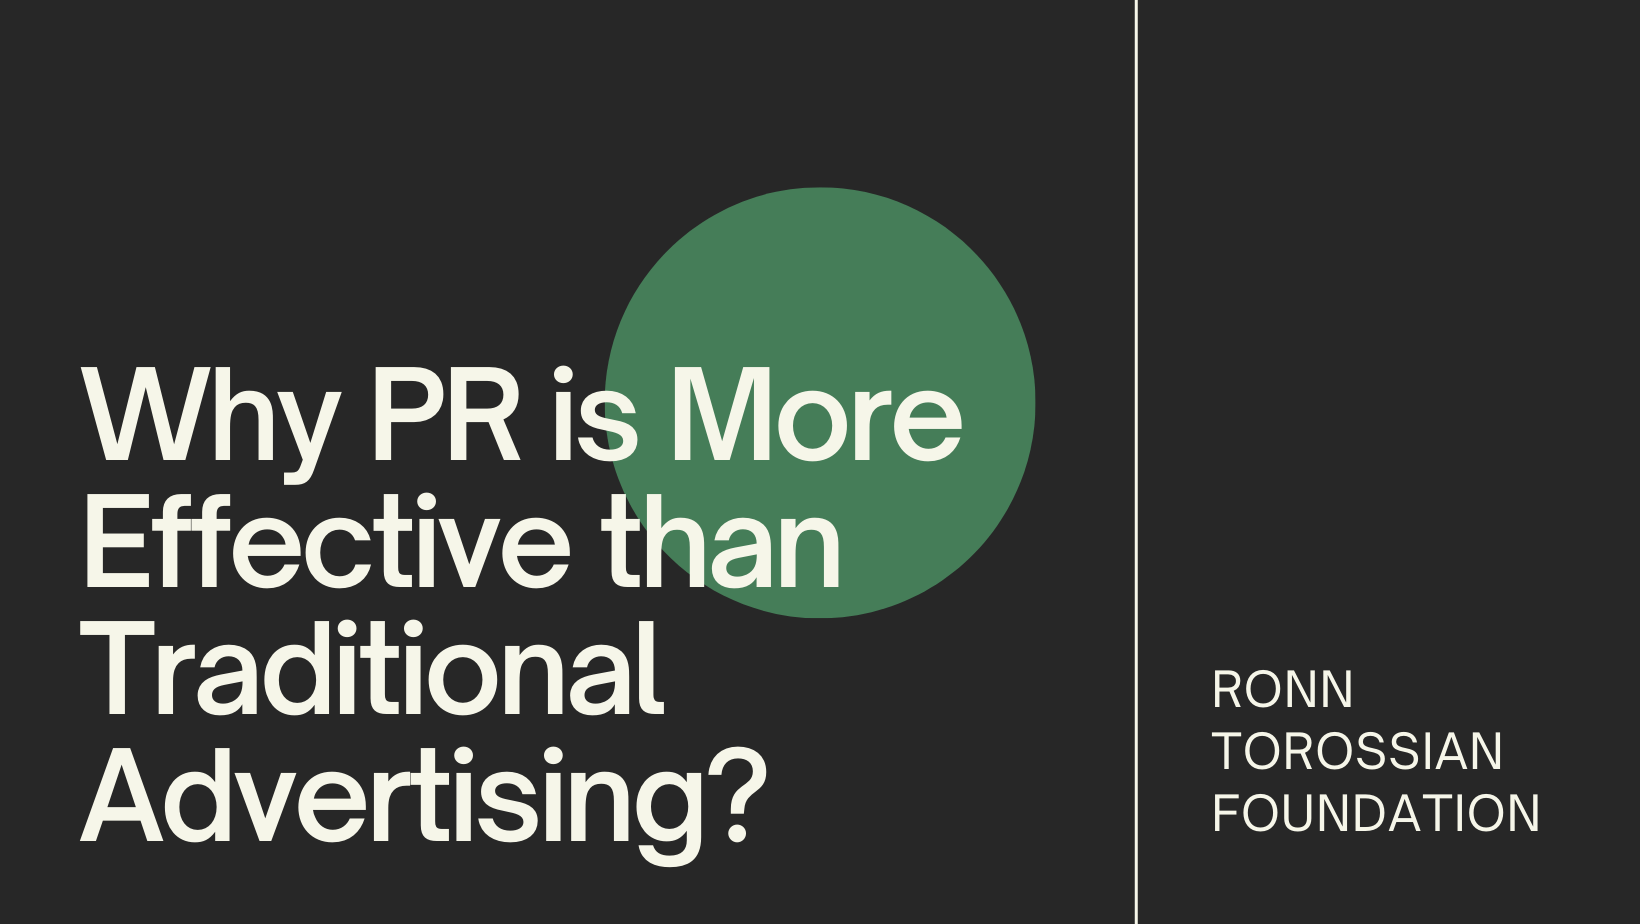 Why PR is More Effective than Traditional Advertising?